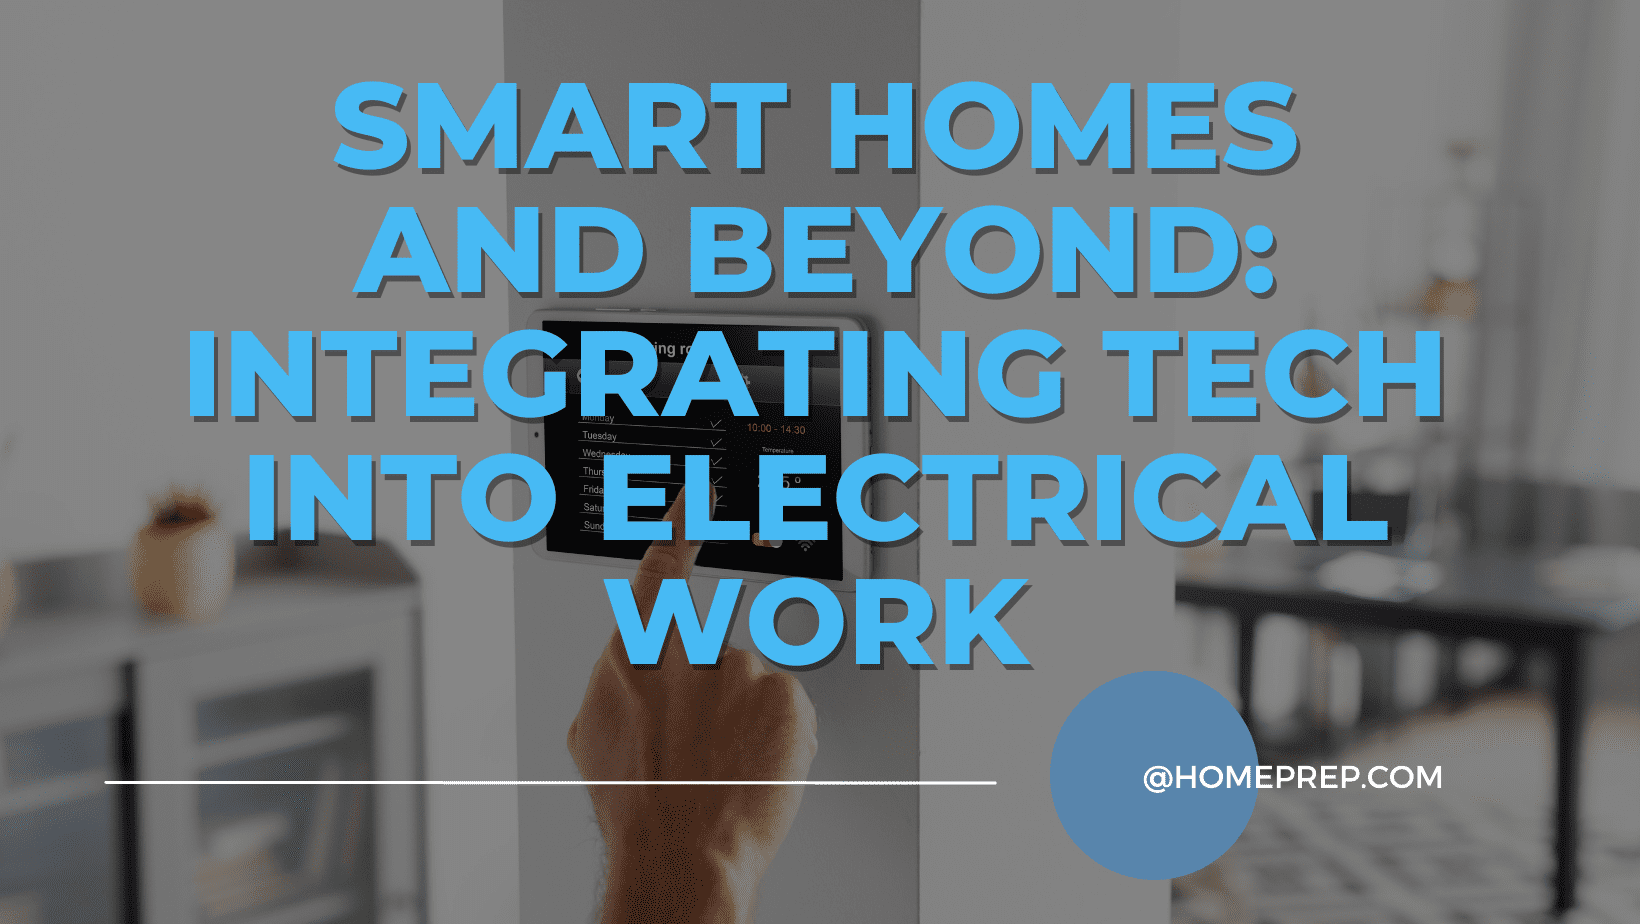 Smart Homes and Beyond: Integrating Technology into Electrical Work